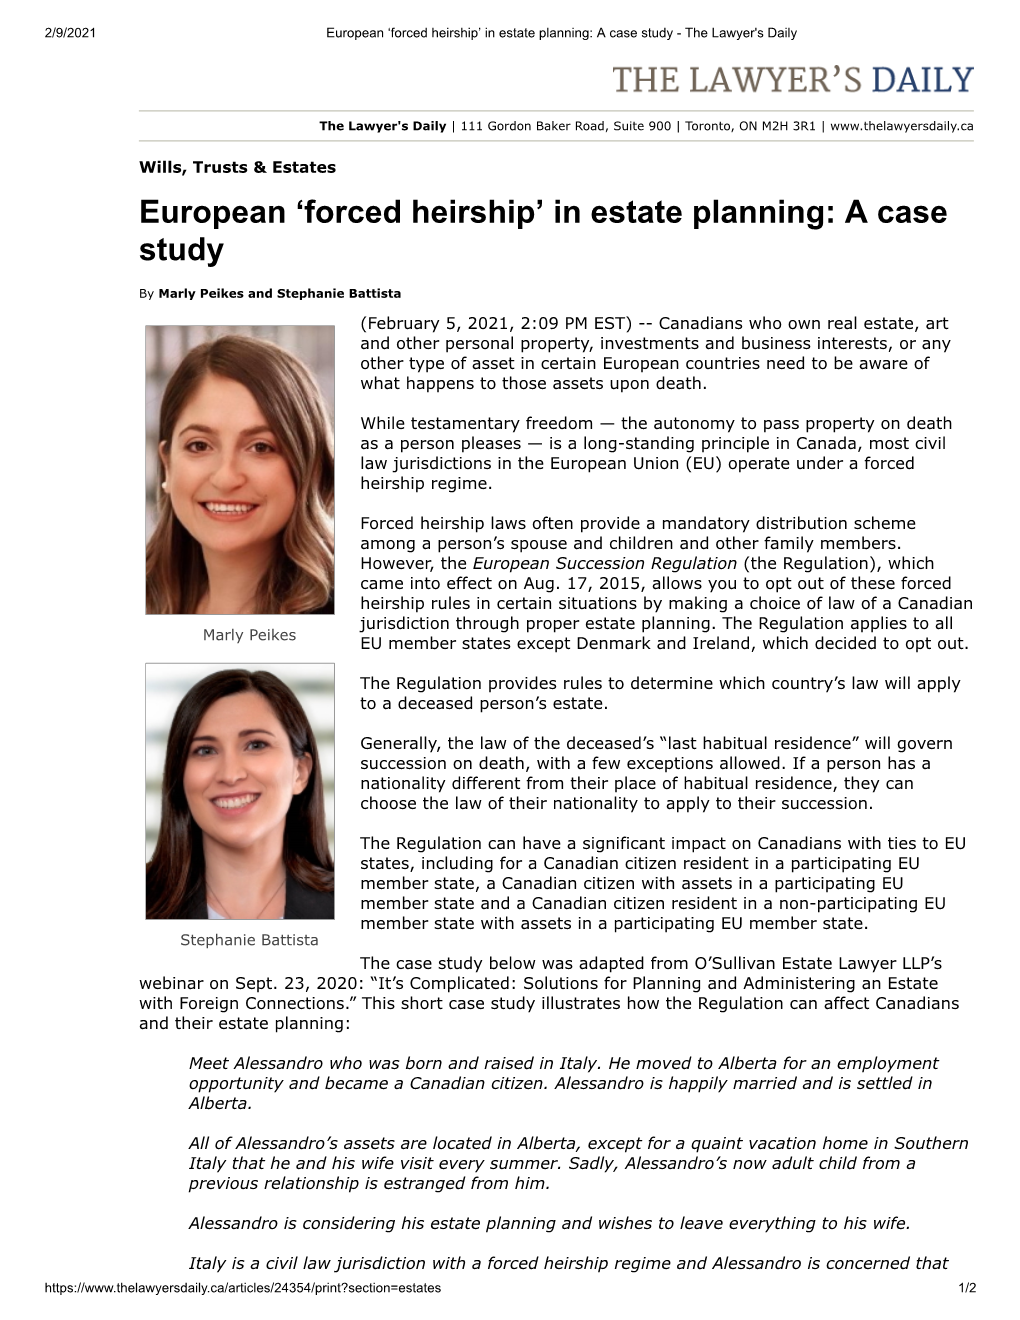 European 'Forced Heirship' in Estate Planning: a Case Study